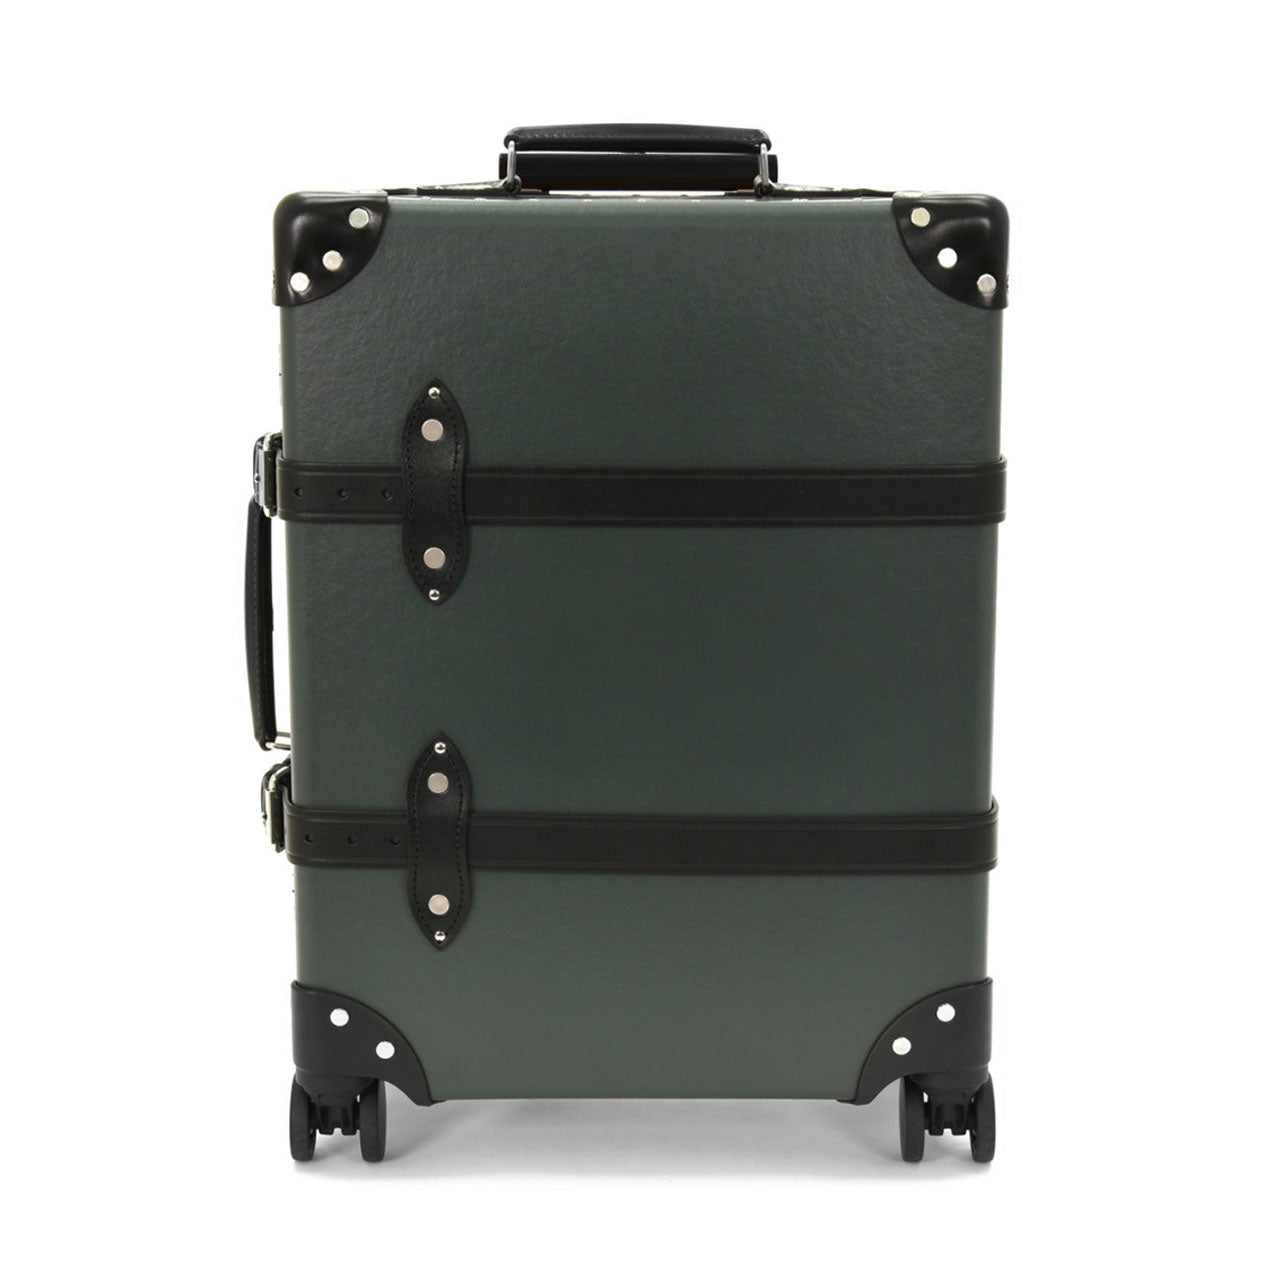 Globe-Trotter No Time to Die Carry-On Trolley Case